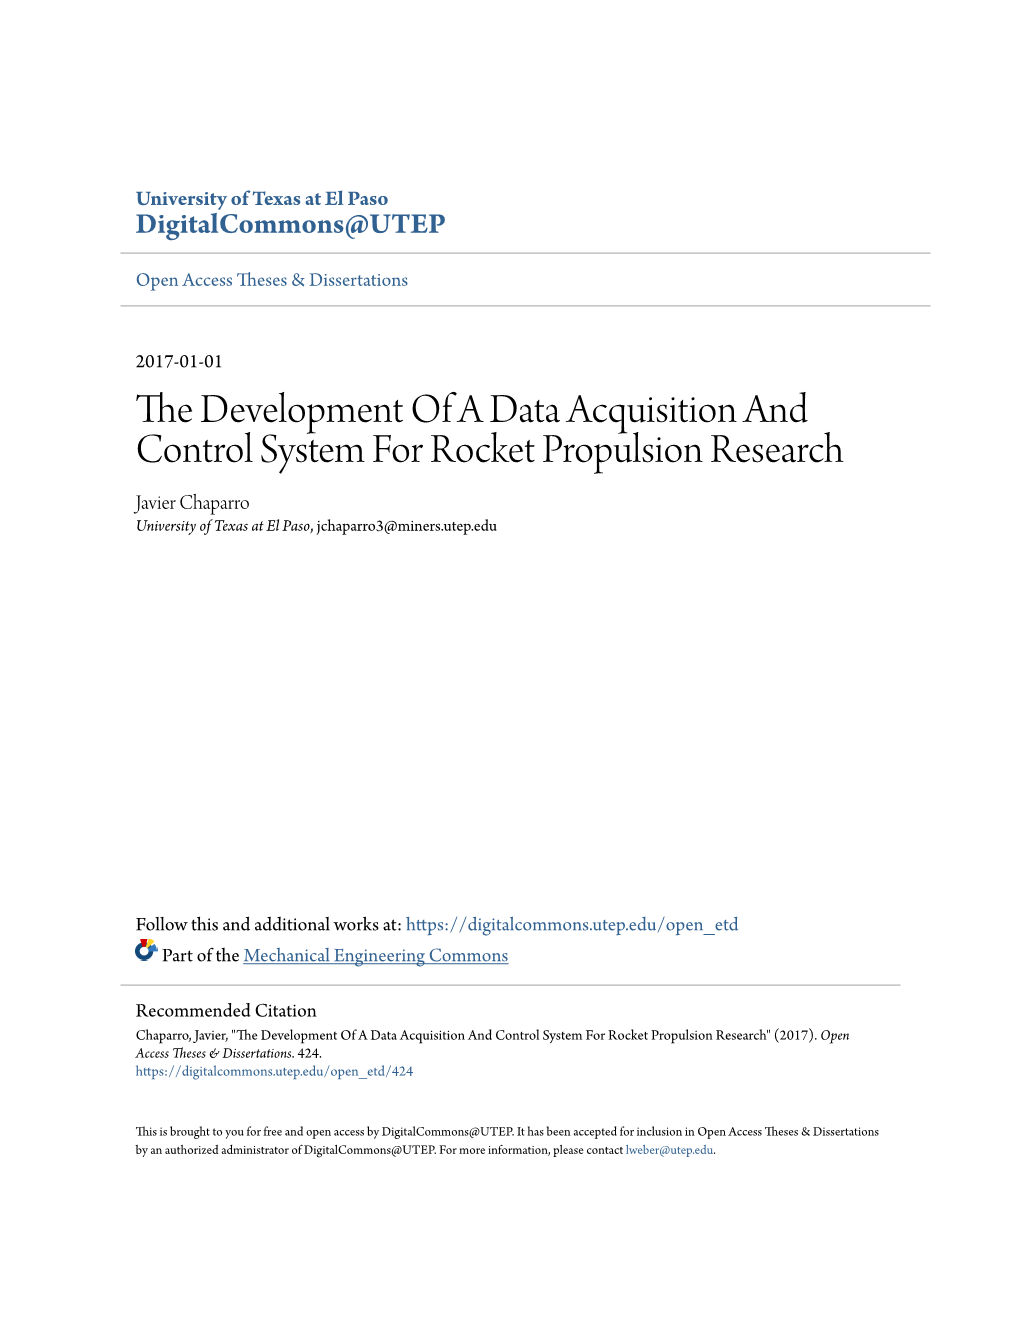 The Development of a Data Acquisition and Control System for Rocket Propulsion Research